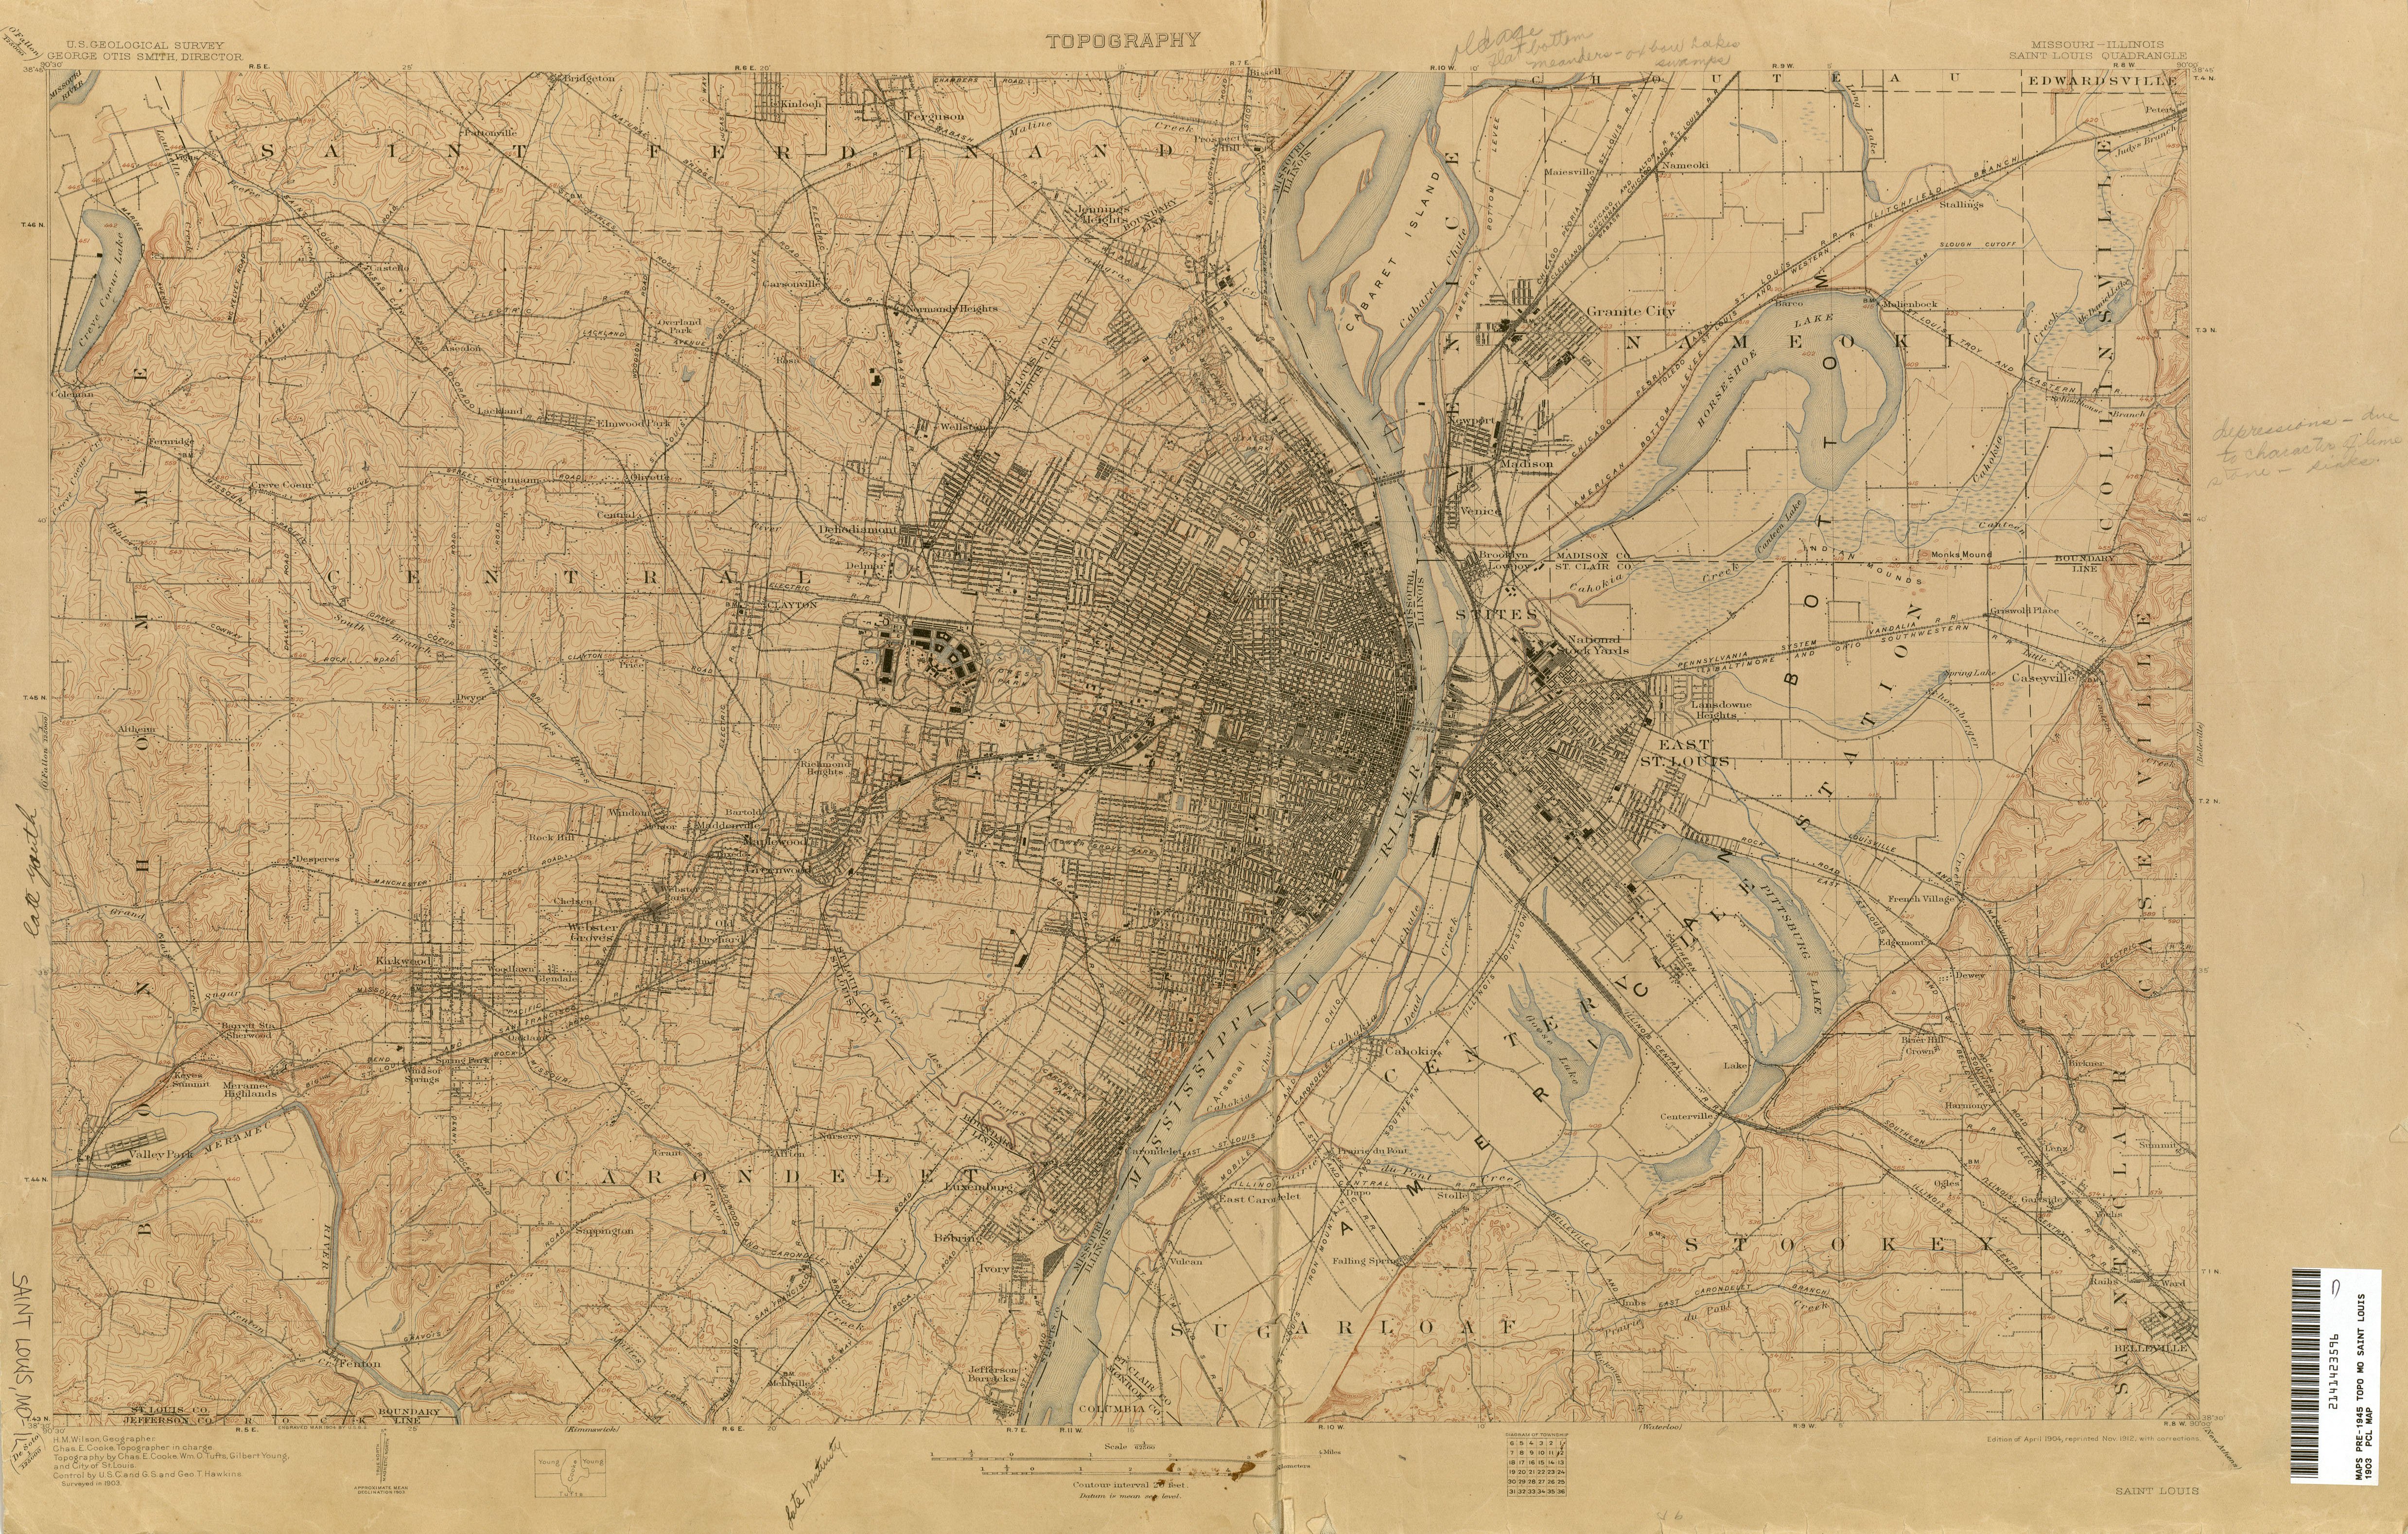 1903 Topographical Map of St. Louis Metro : StLouis